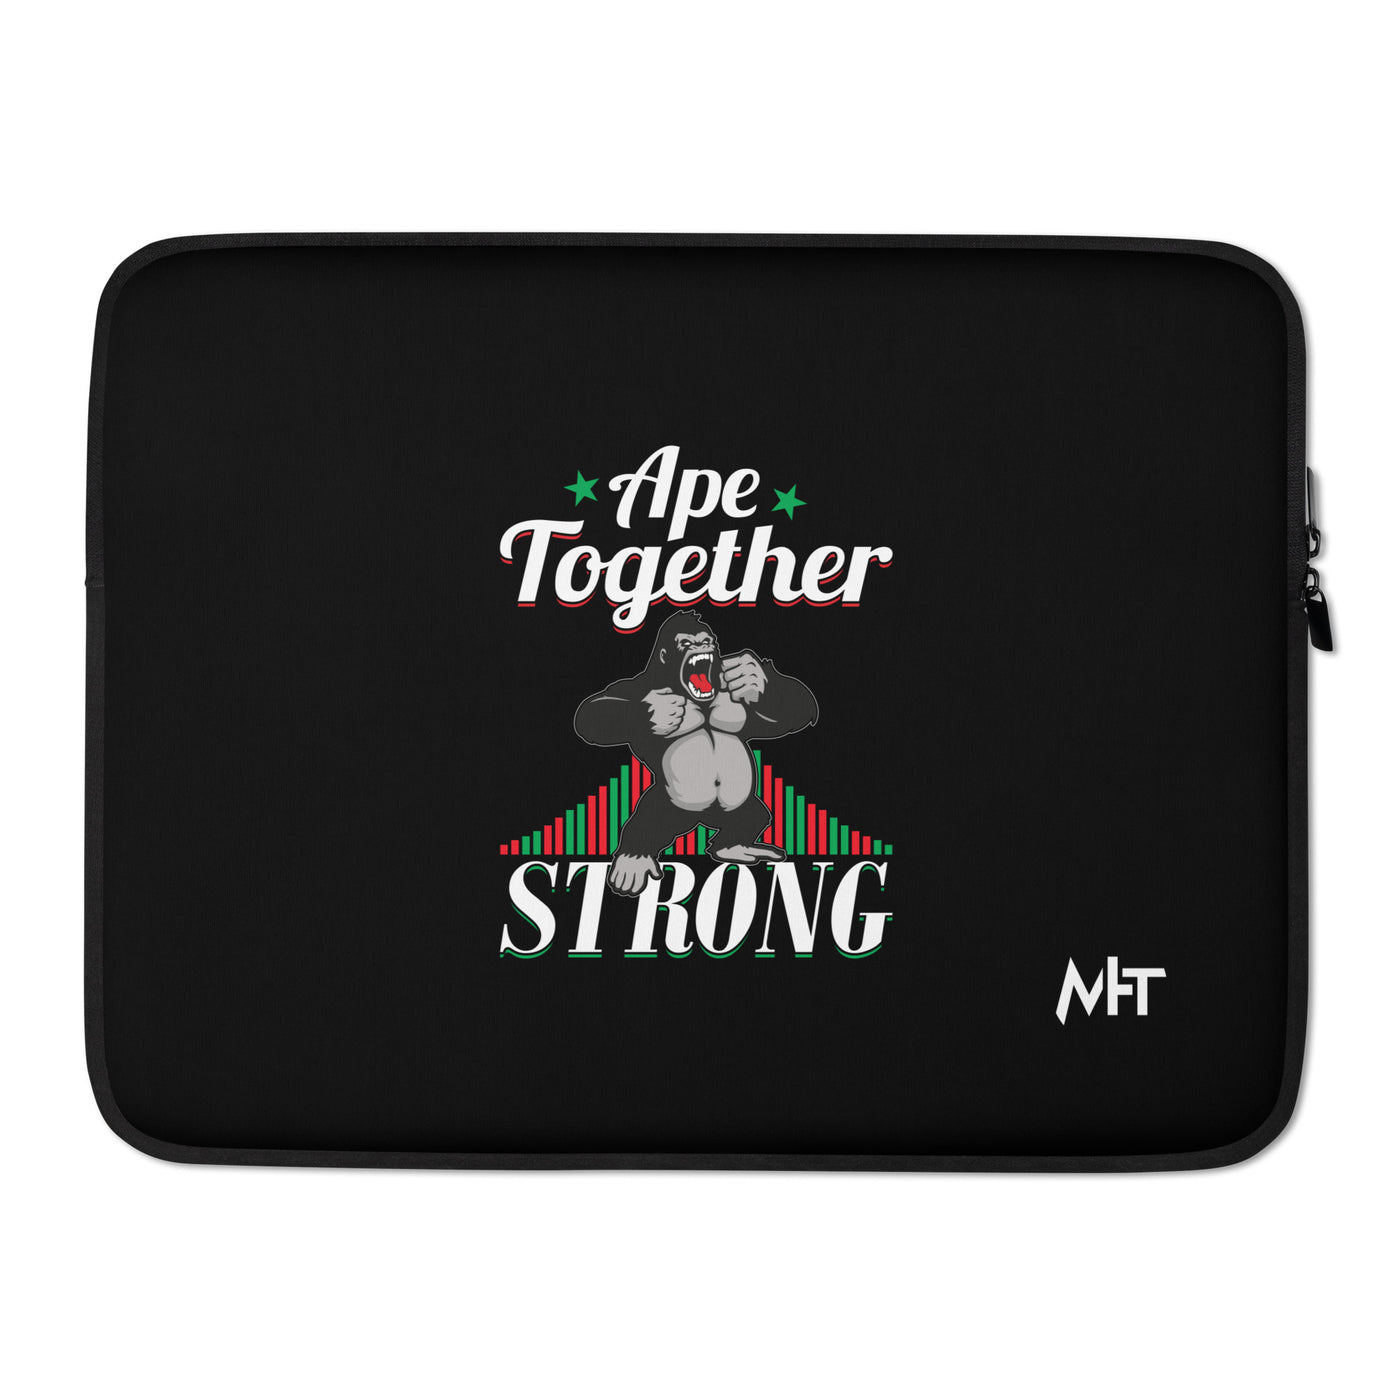 Ape together strong - Laptop Sleeve